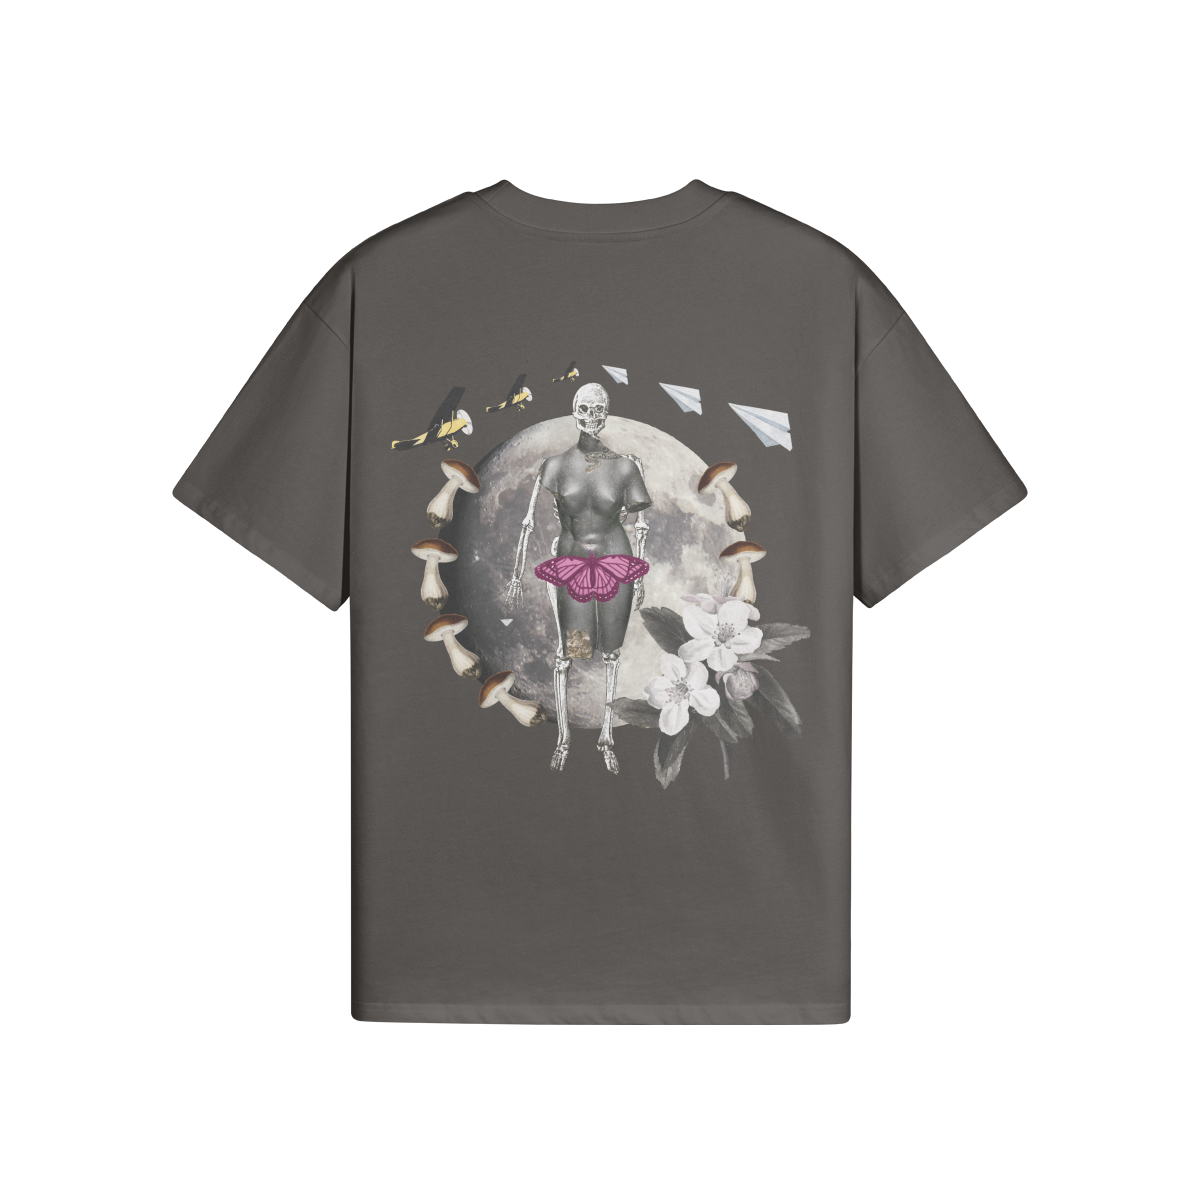 BUTTERFLY EFFECT (BACK PRINT) - Unisex Oversized T-shirt - Charcoal gray